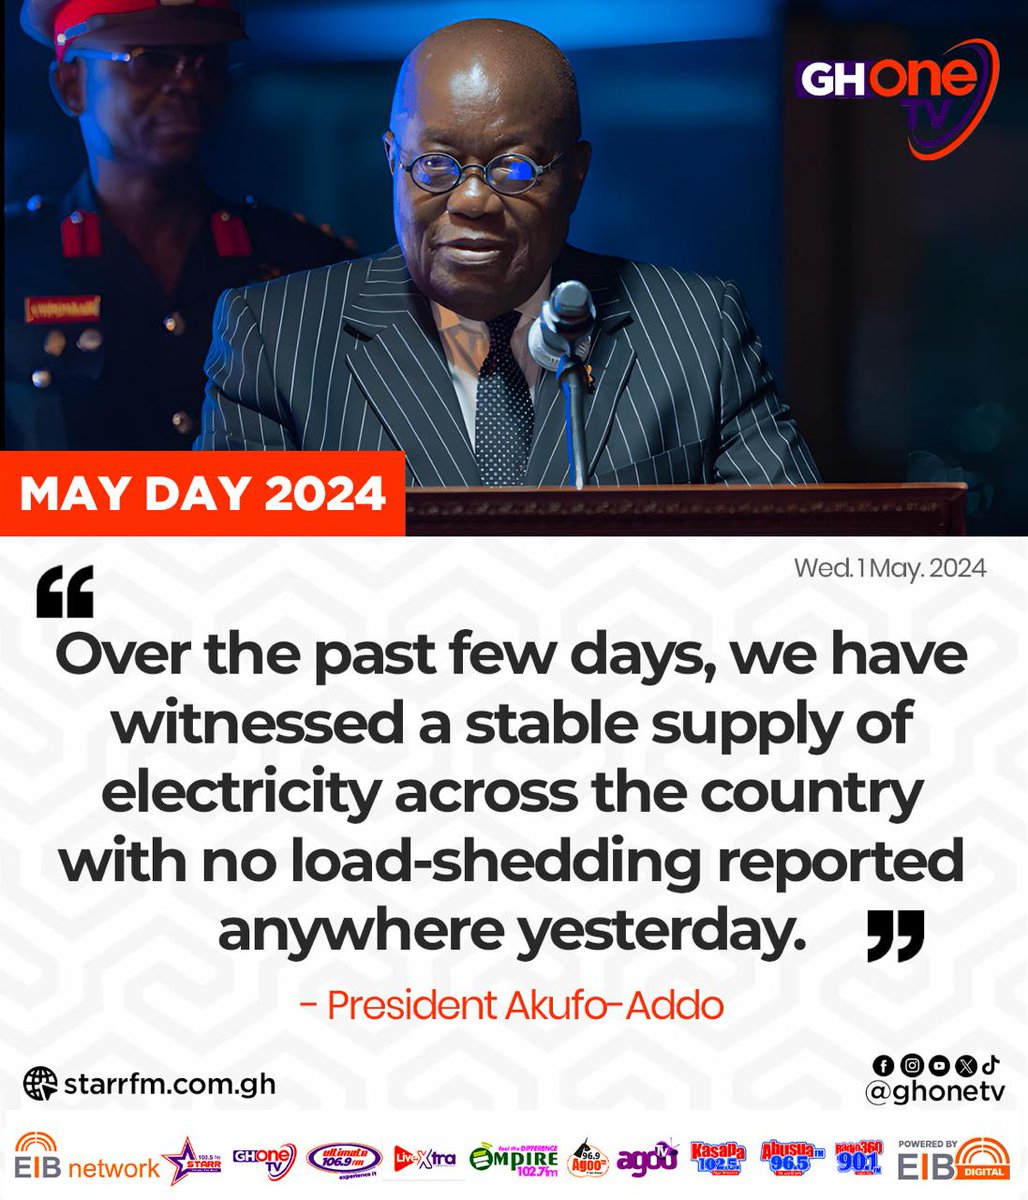 Excerpts from President Akufo-Addo's May Day speech at the Independence Square...

#GHOneTV #MayDay2024 #WorkersDay #MayDay